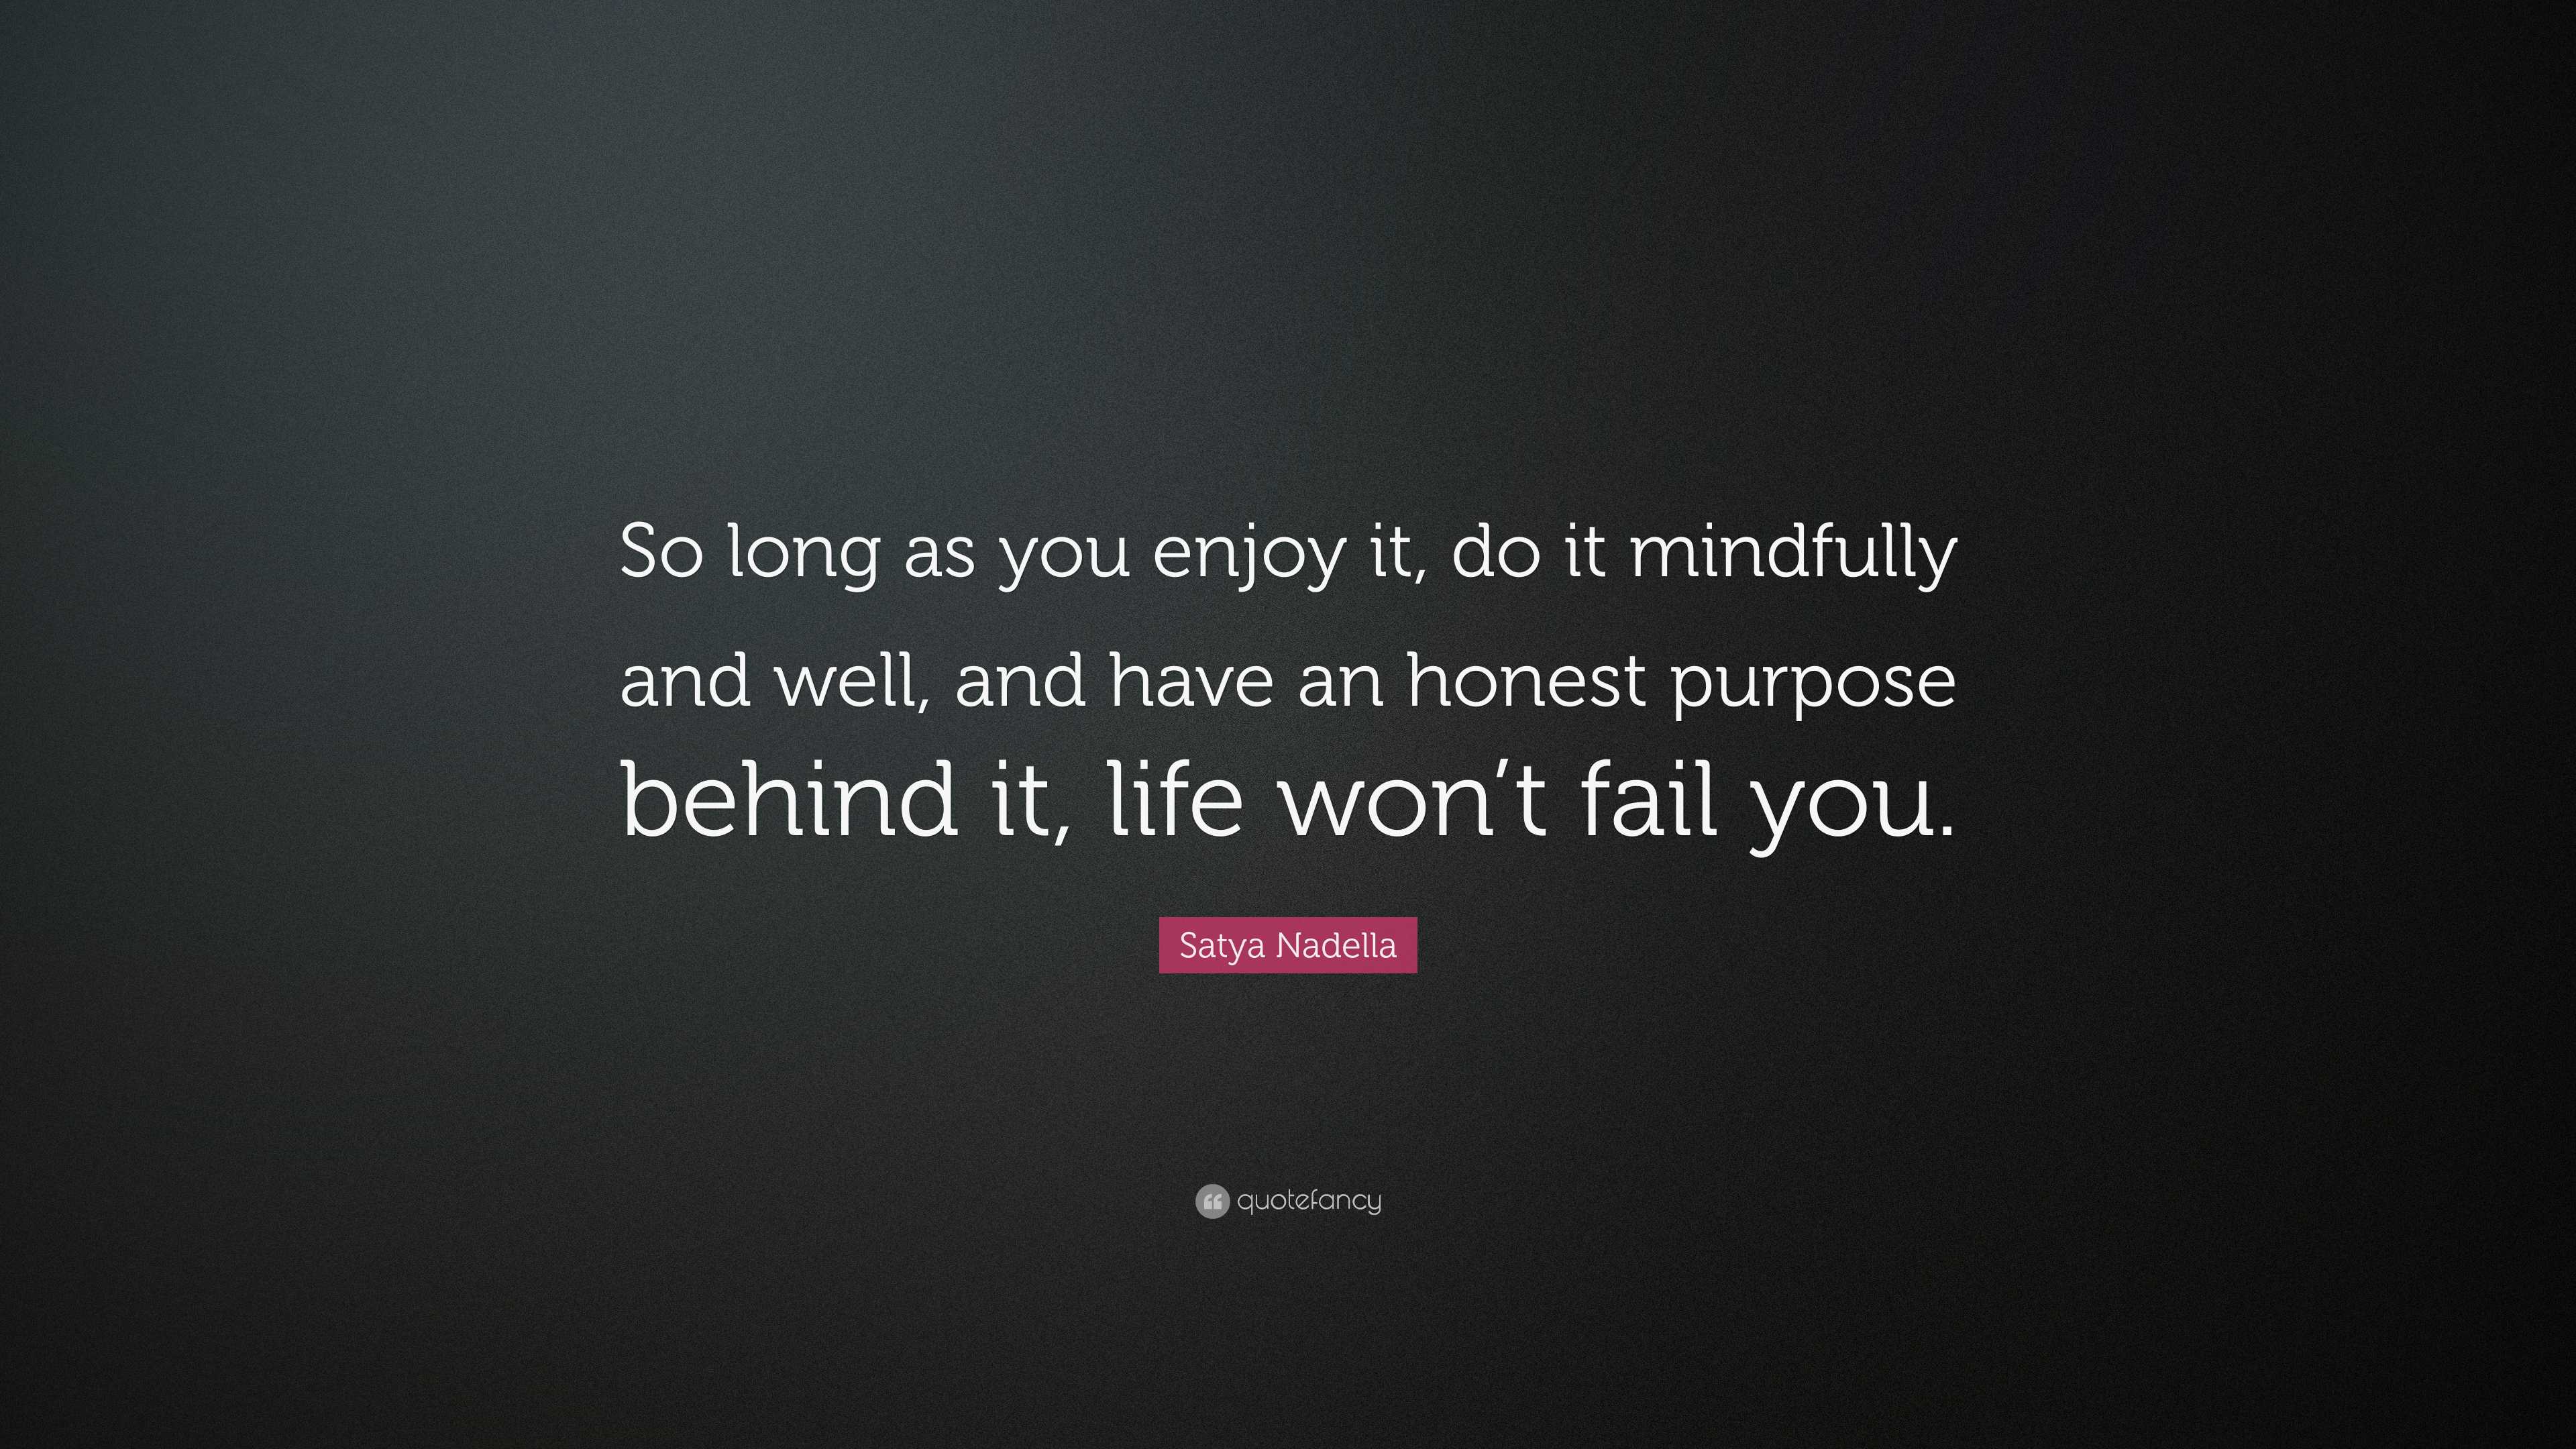 Satya Nadella Quote: “So long as you enjoy it, do it mindfully and well ...